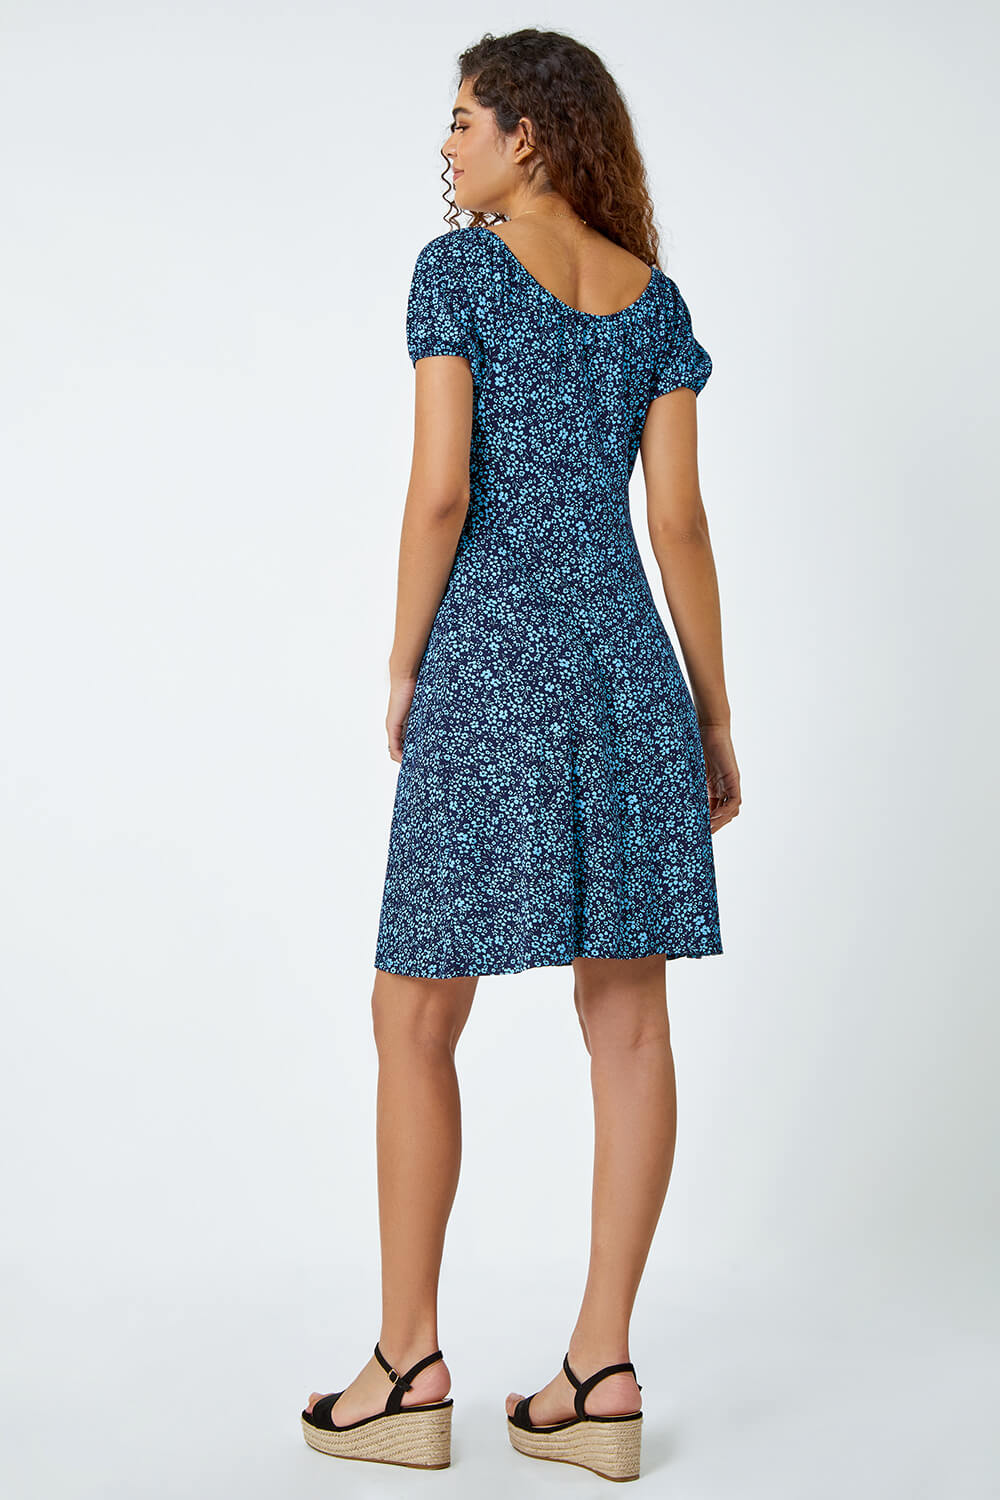 Blue Ditsy Floral Stretch Ruched Dress, Image 3 of 5